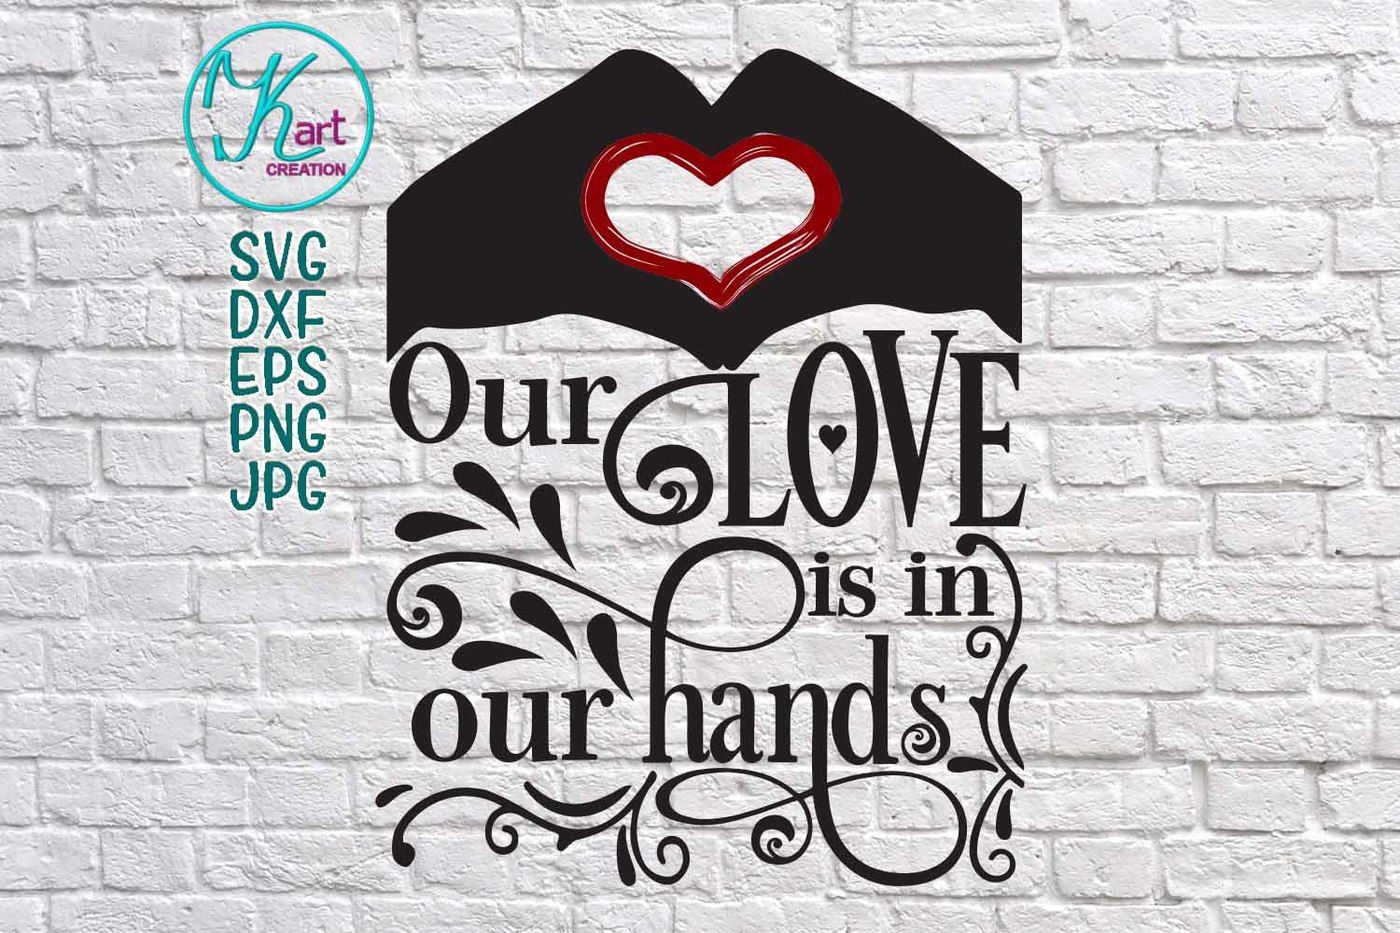 Love Svg Valentine Svg Valentines Day Svg Love Is In Our Hands Svg Love Saying Love Quote Svg Couple Saying Christian Svg Faith Svg By Kartcreation Thehungryjpeg Com